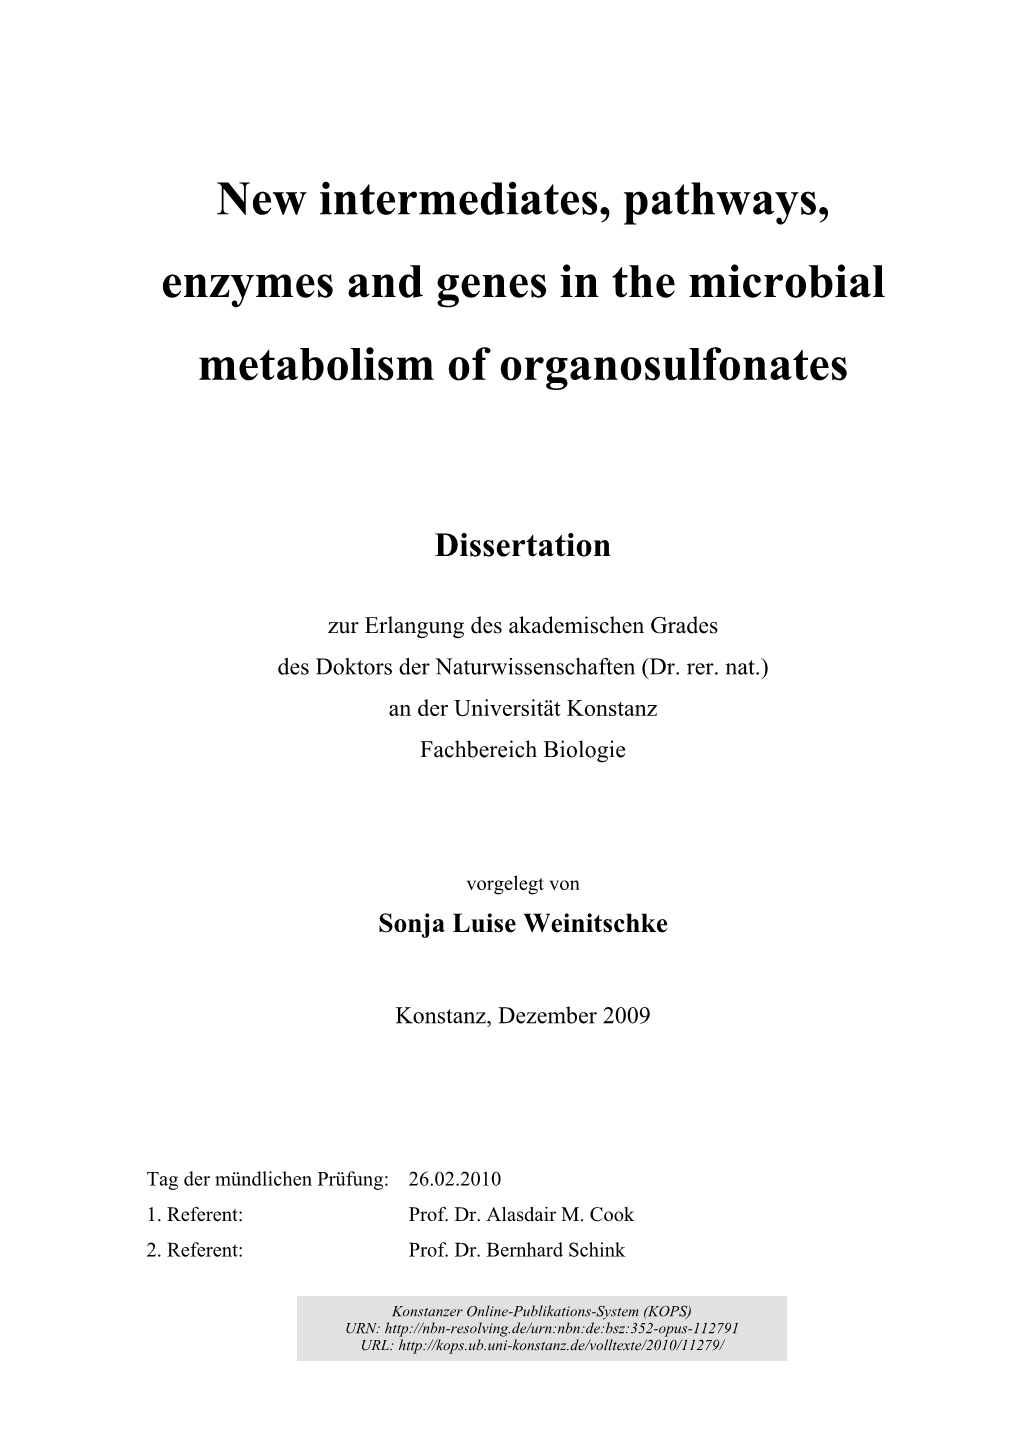 New Intermediates, Pathways, Enzymes and Genes in the Microbial Metabolism of Organosulfonates